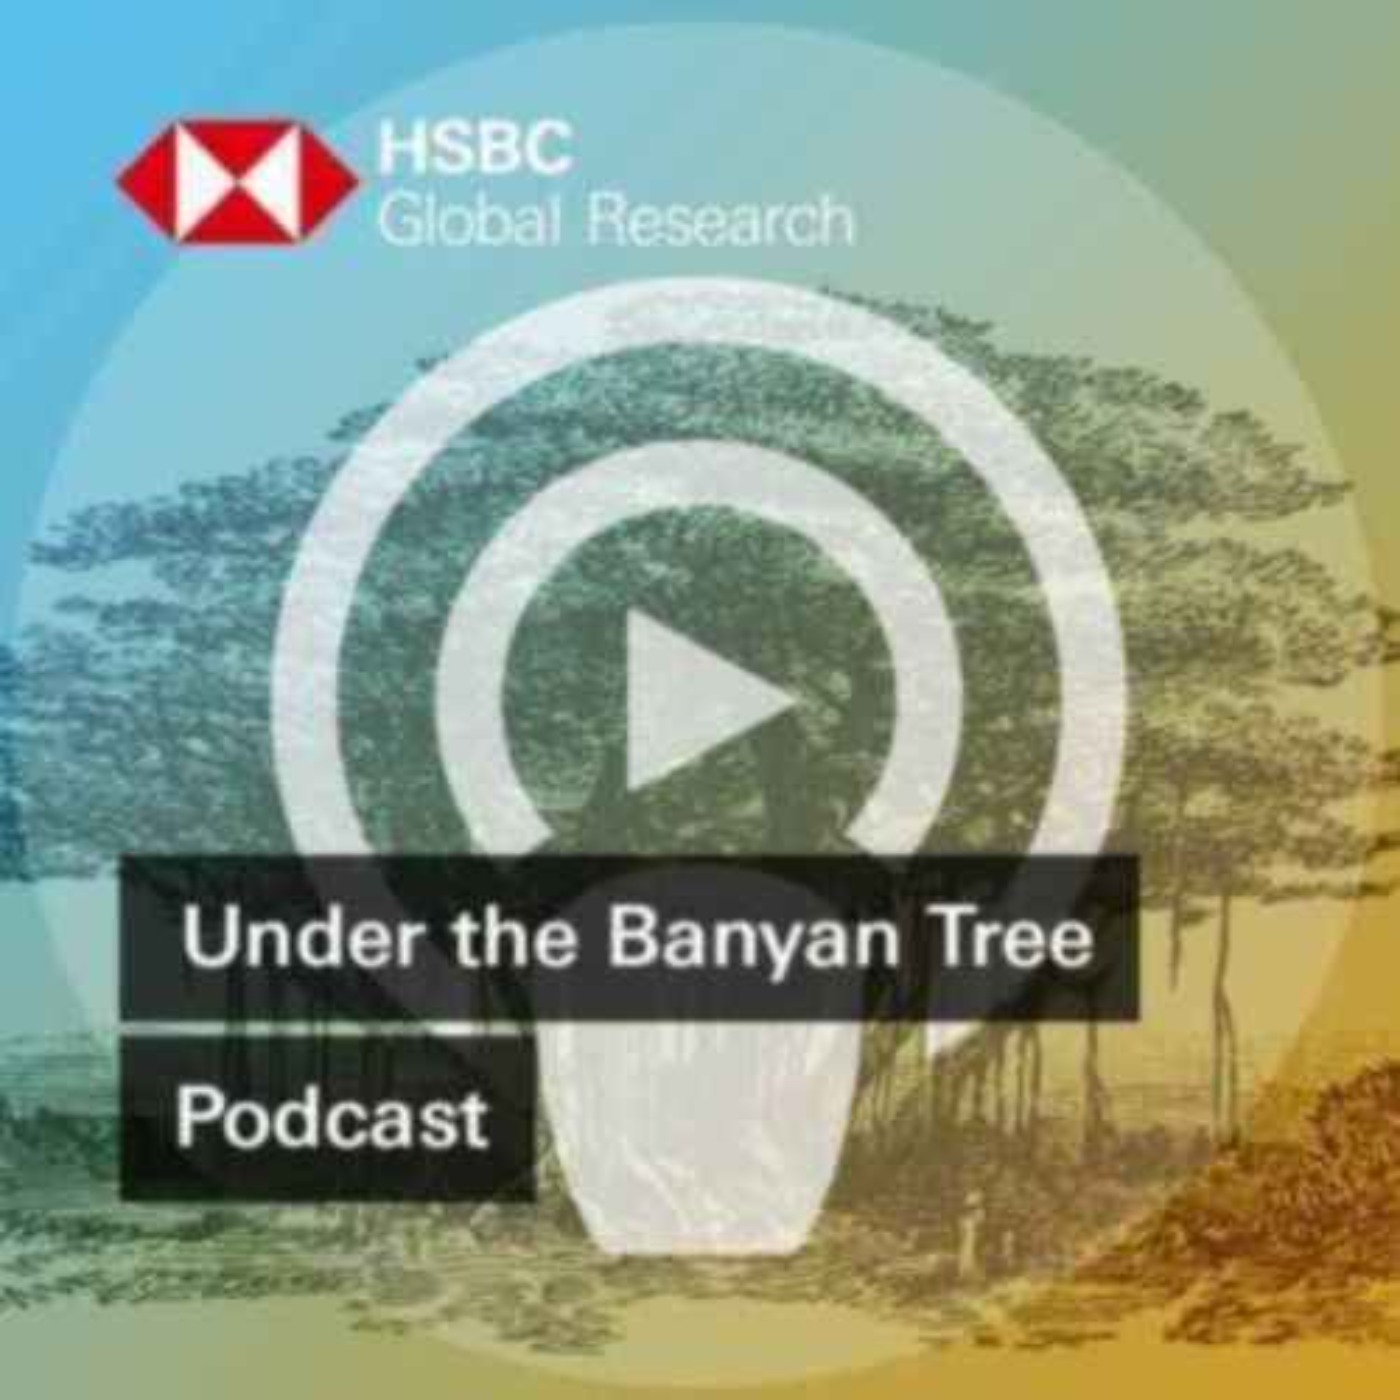 Under the Banyan Tree - Why quite a lot of things are getting cheaper